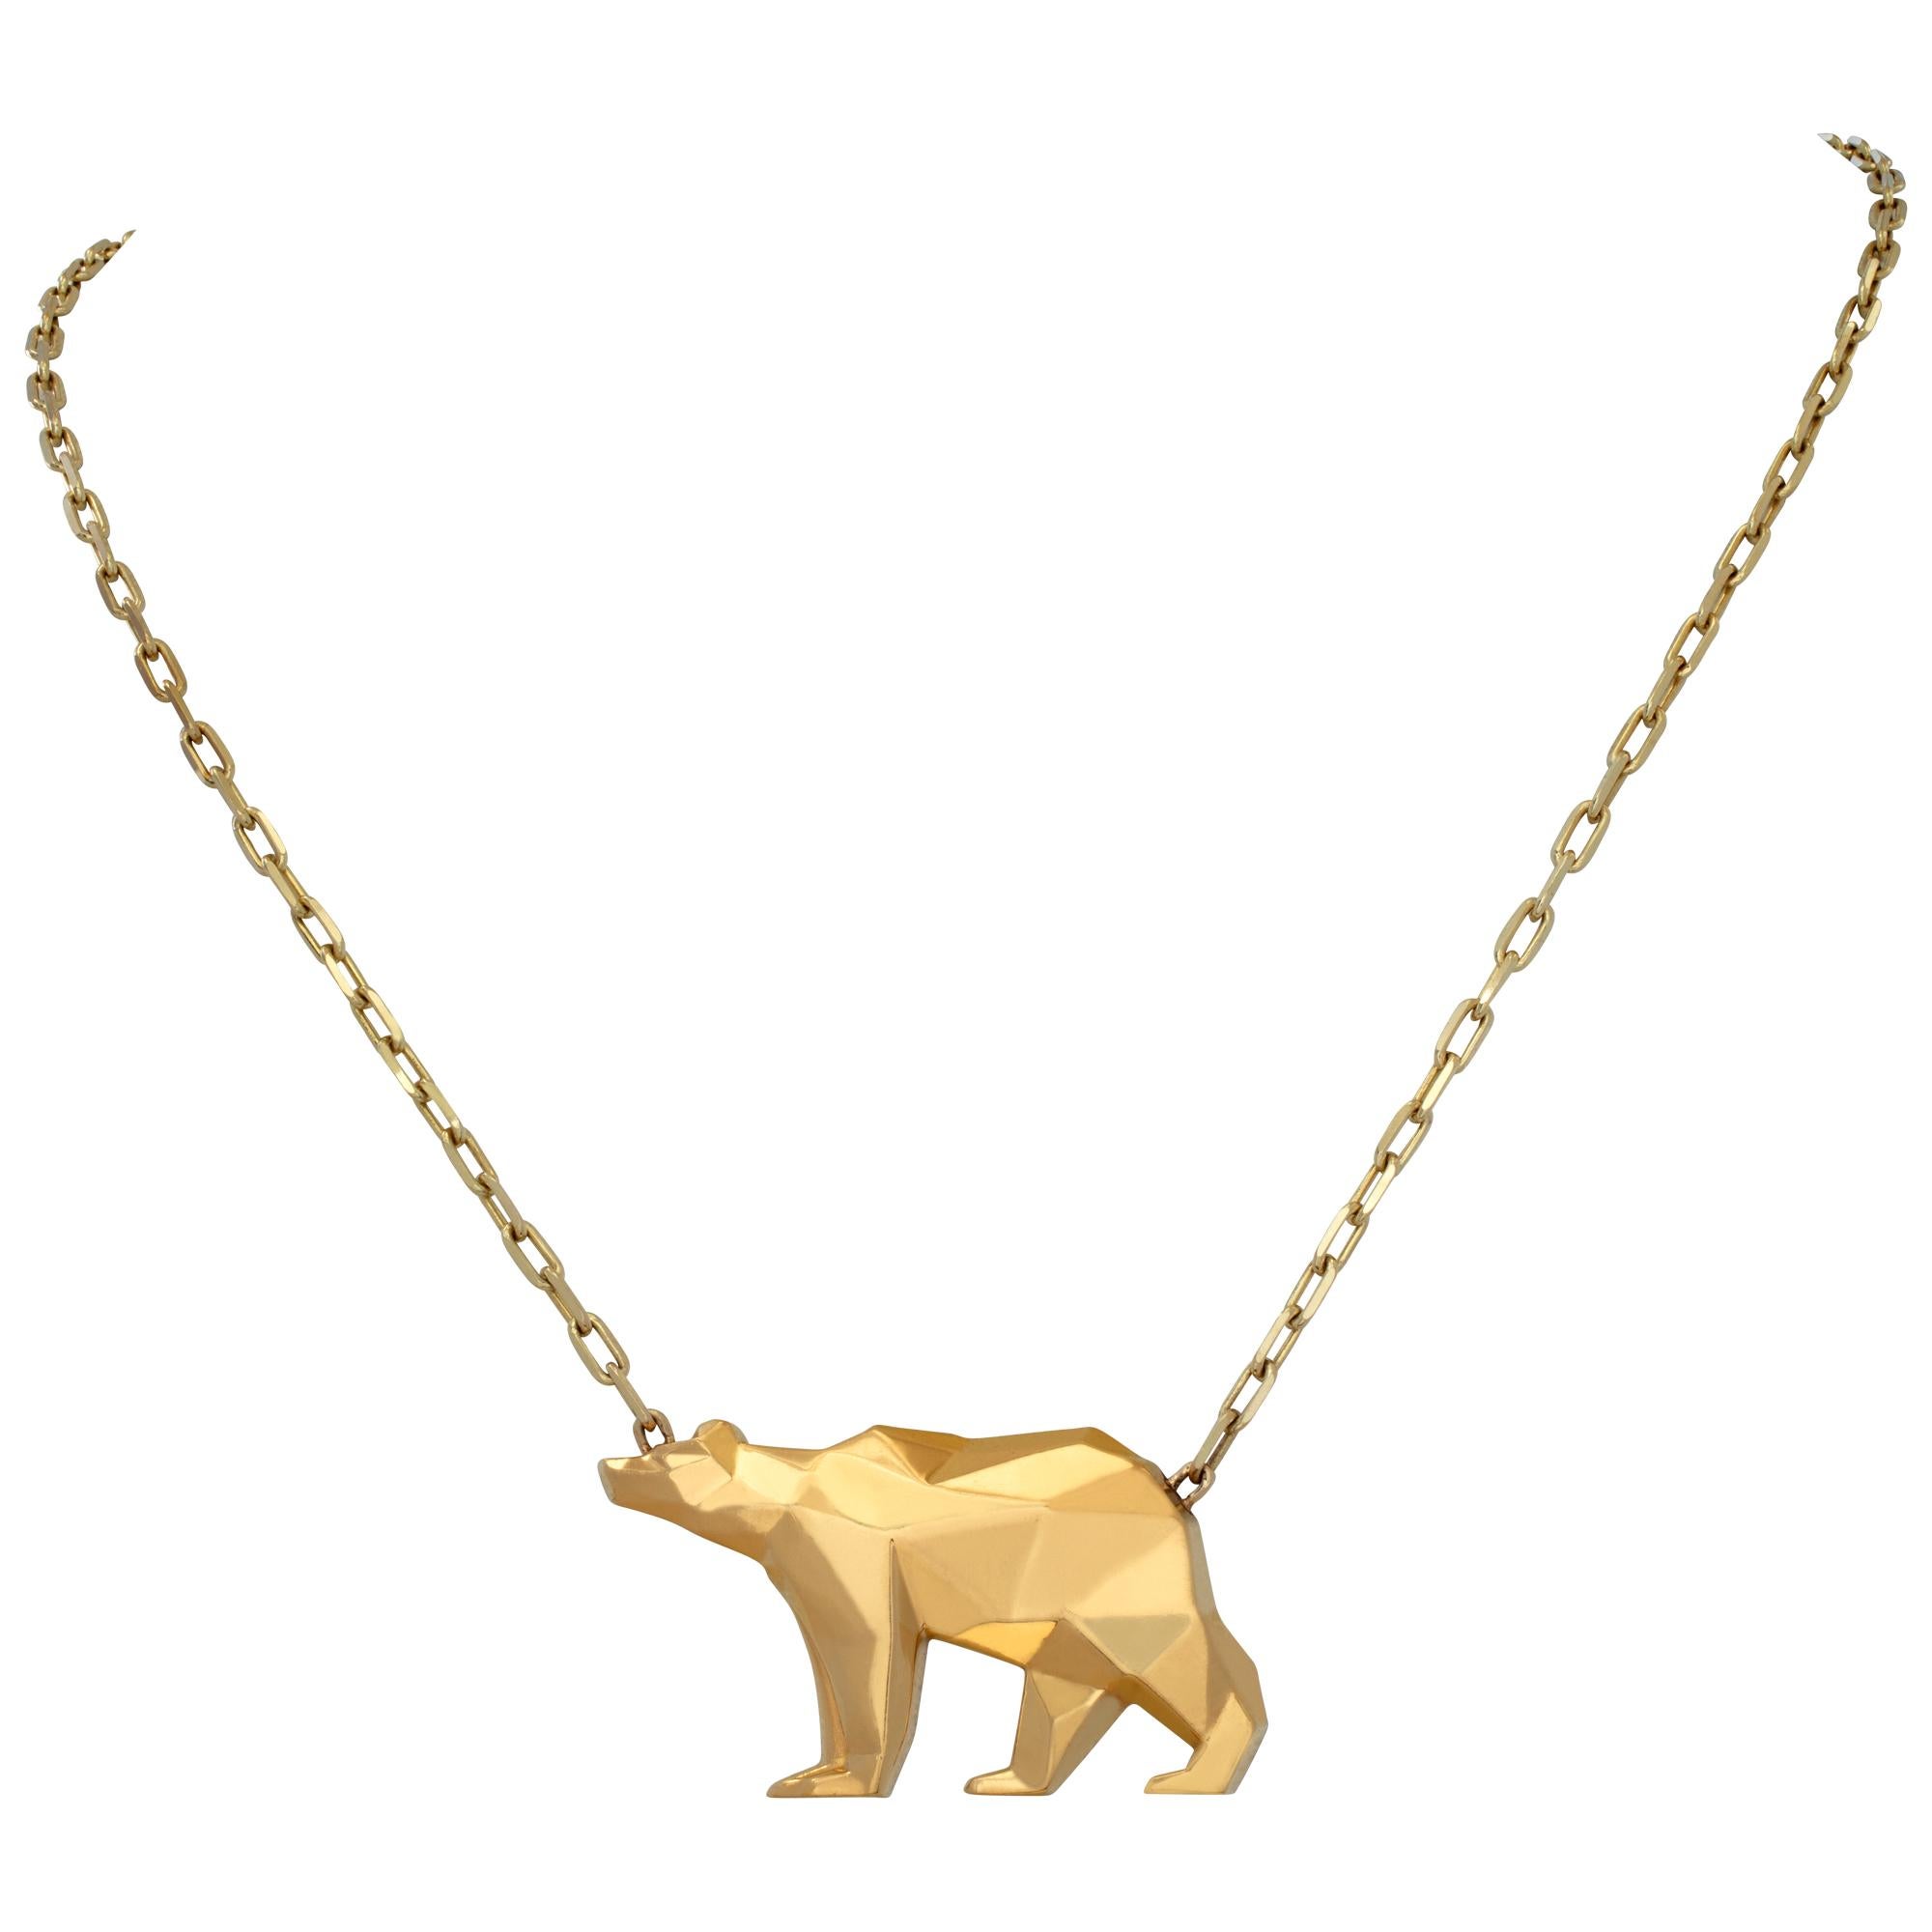 Bear pendant in 24k gold. Contains almost 1 oz of pure California .999 gold with 18k yellow gold chain. Limited edition No. 003. Measures 18 inches.
